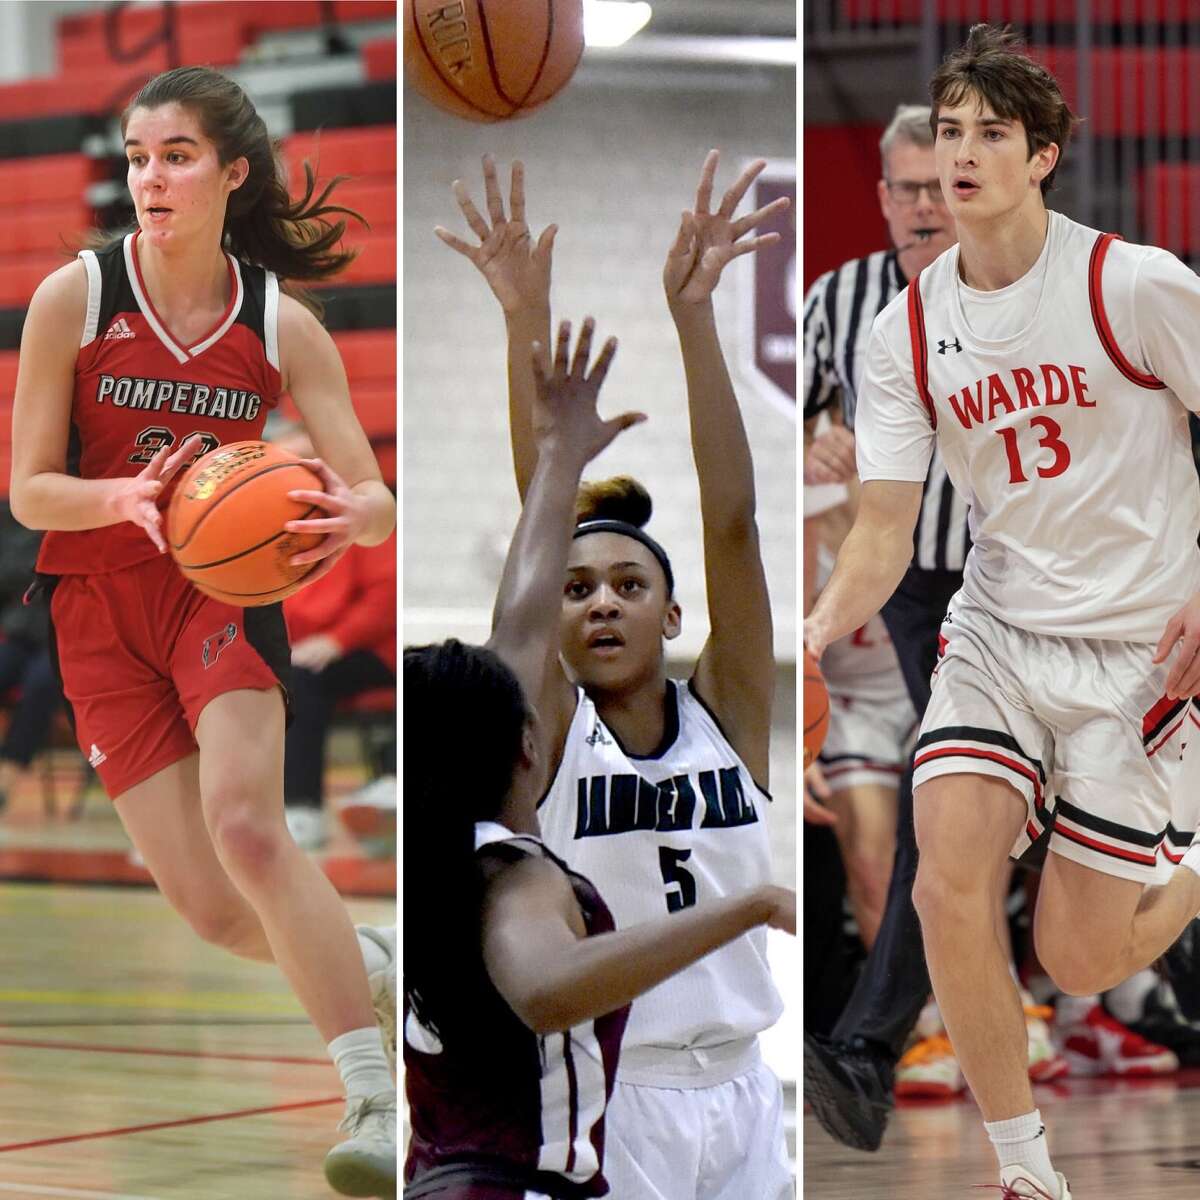 Thre of Connecticut's 2023 nominees to the McDonald's All-American basketball teams: From left, Pomperaug's Claudia Schneider; Hamden Hall's Jayda Johnson; Warde's Jack Plesser.